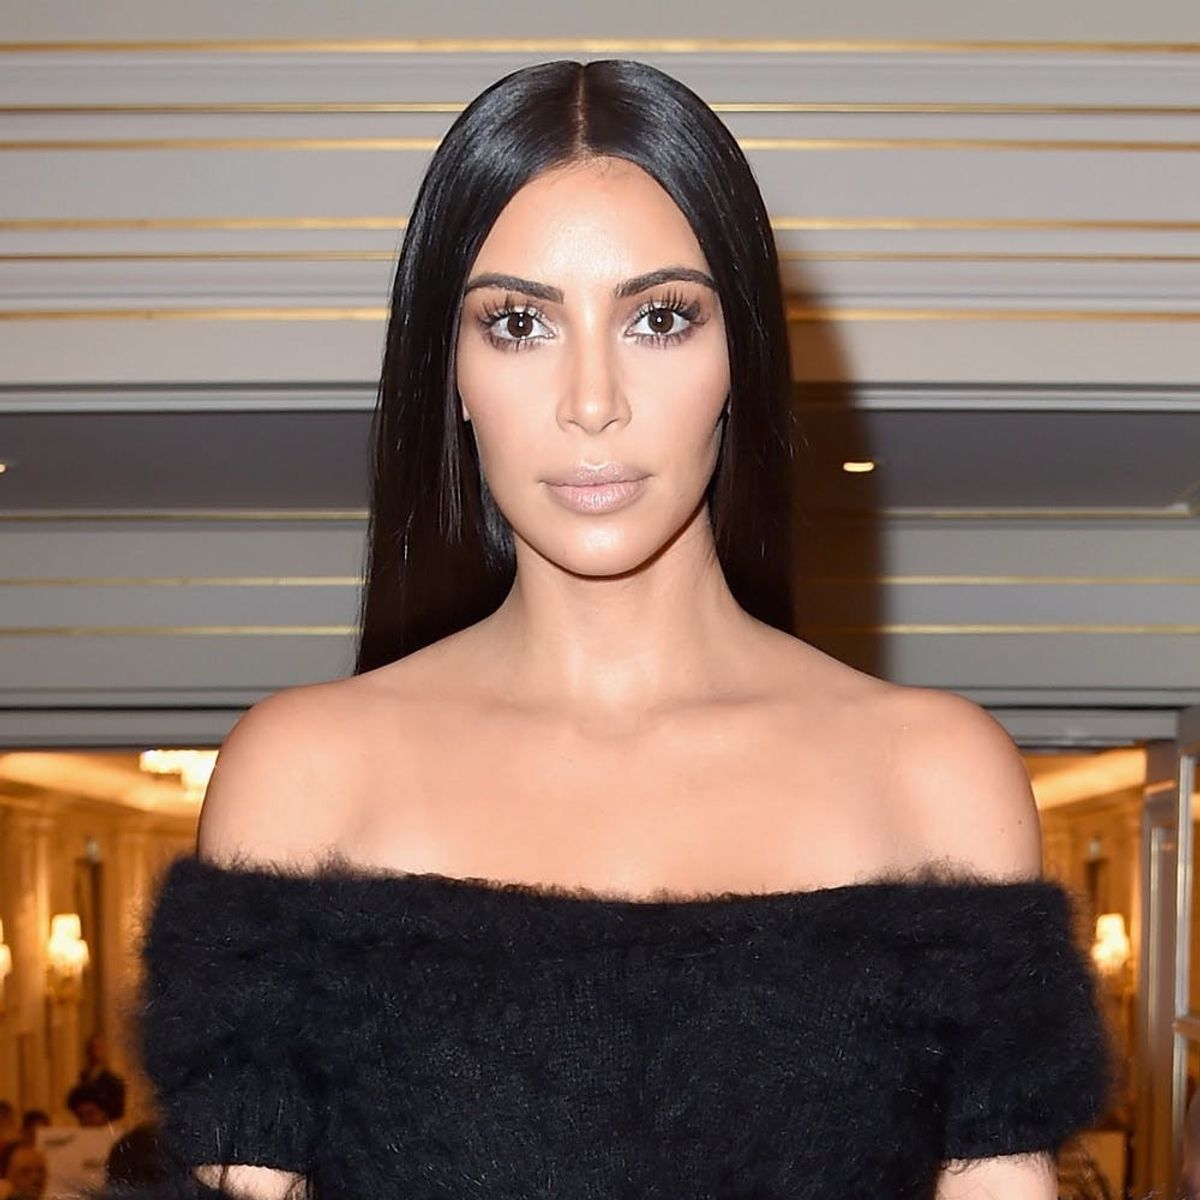 Kim K Just Debuted a Shocking New Lip Ring